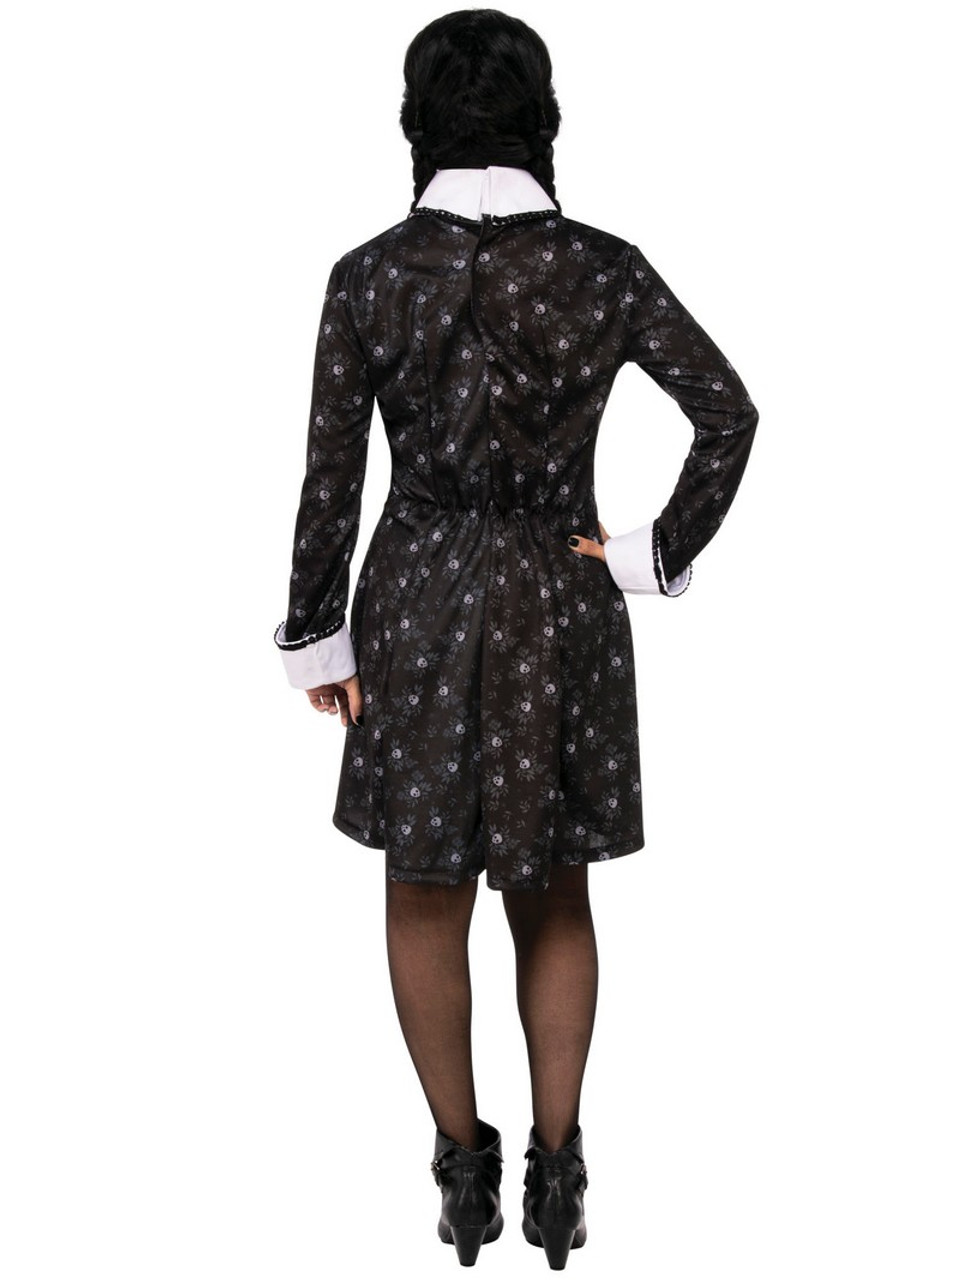 Addams Family Wednesday Adult Costume Inset